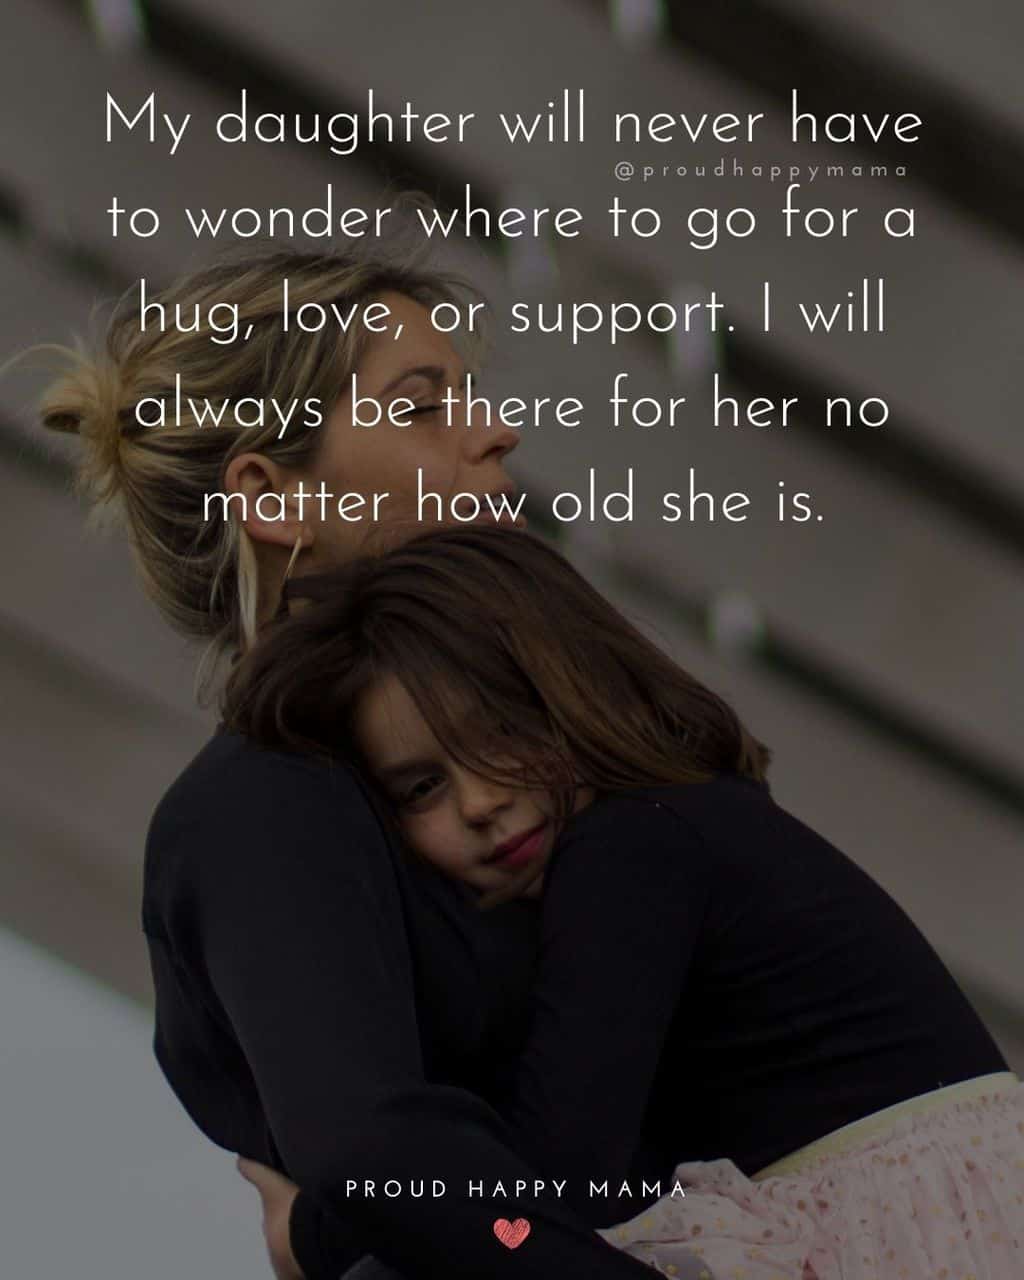 love your daughter quotes - ‘My daughter will never have to wonder where to go for a hug, love, or support. I will always be there for her no matter